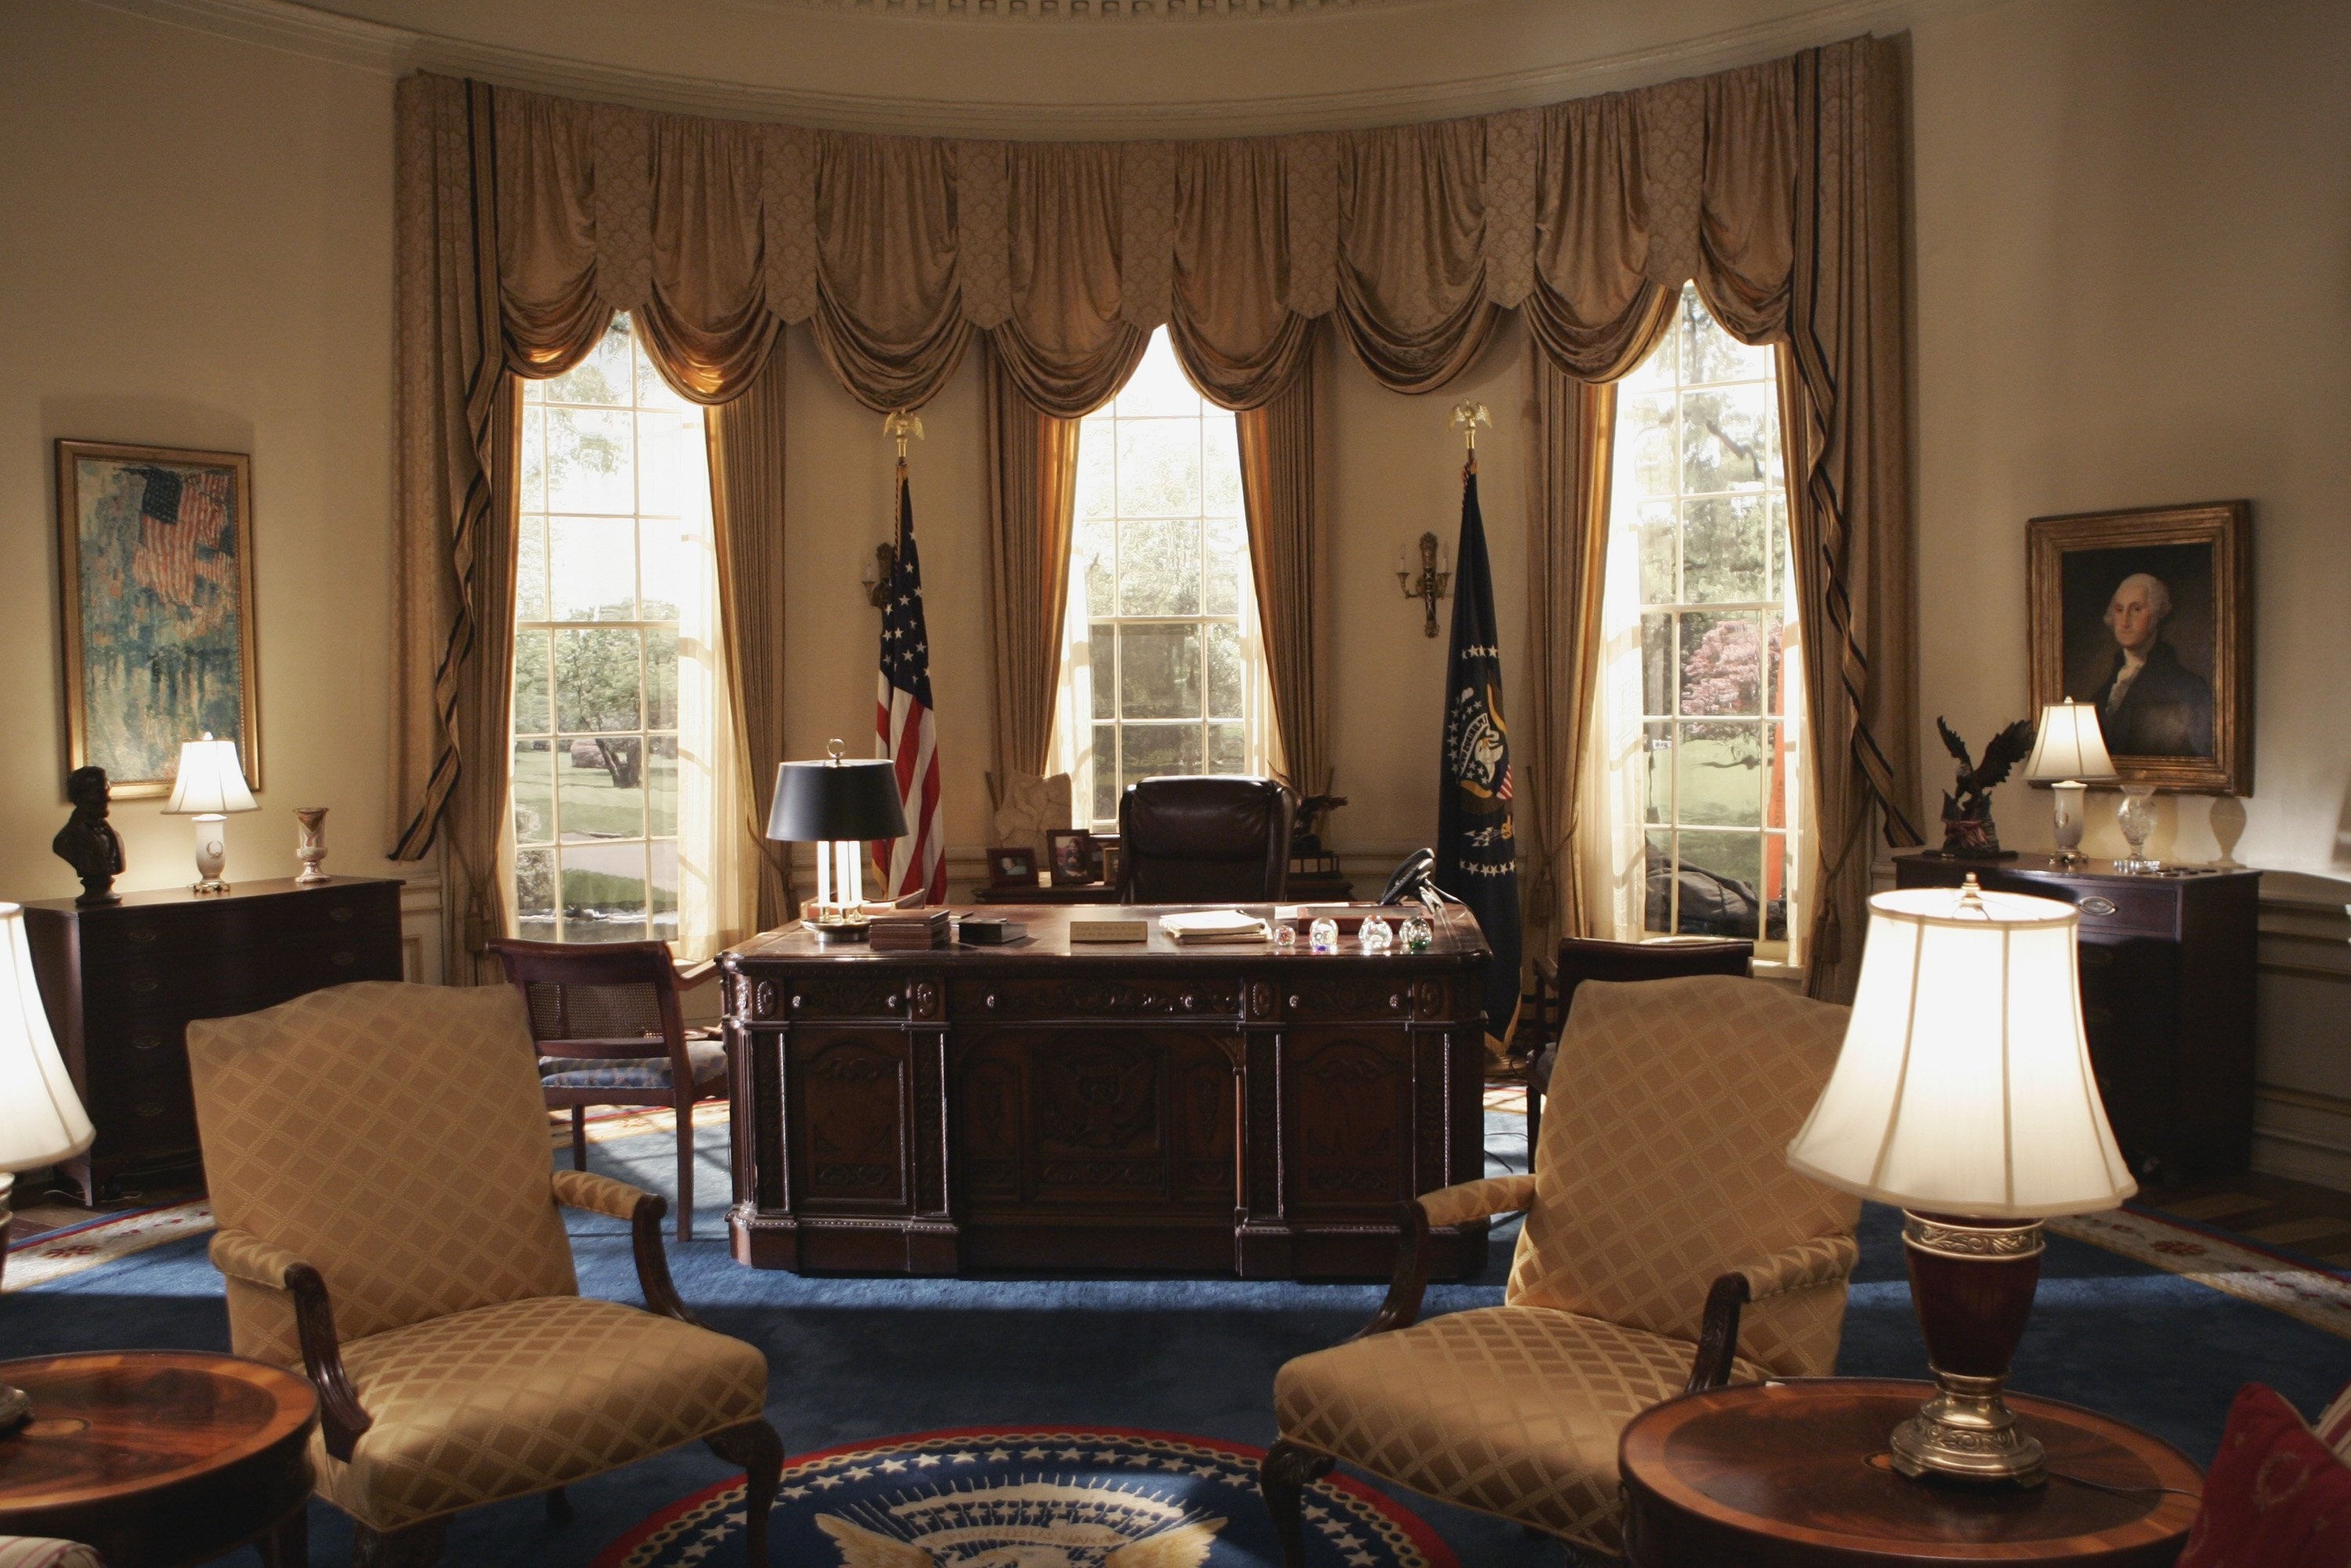 The West Wing, House of Cards, White House recreation, Architectural Digest, 3000x2010 HD Desktop